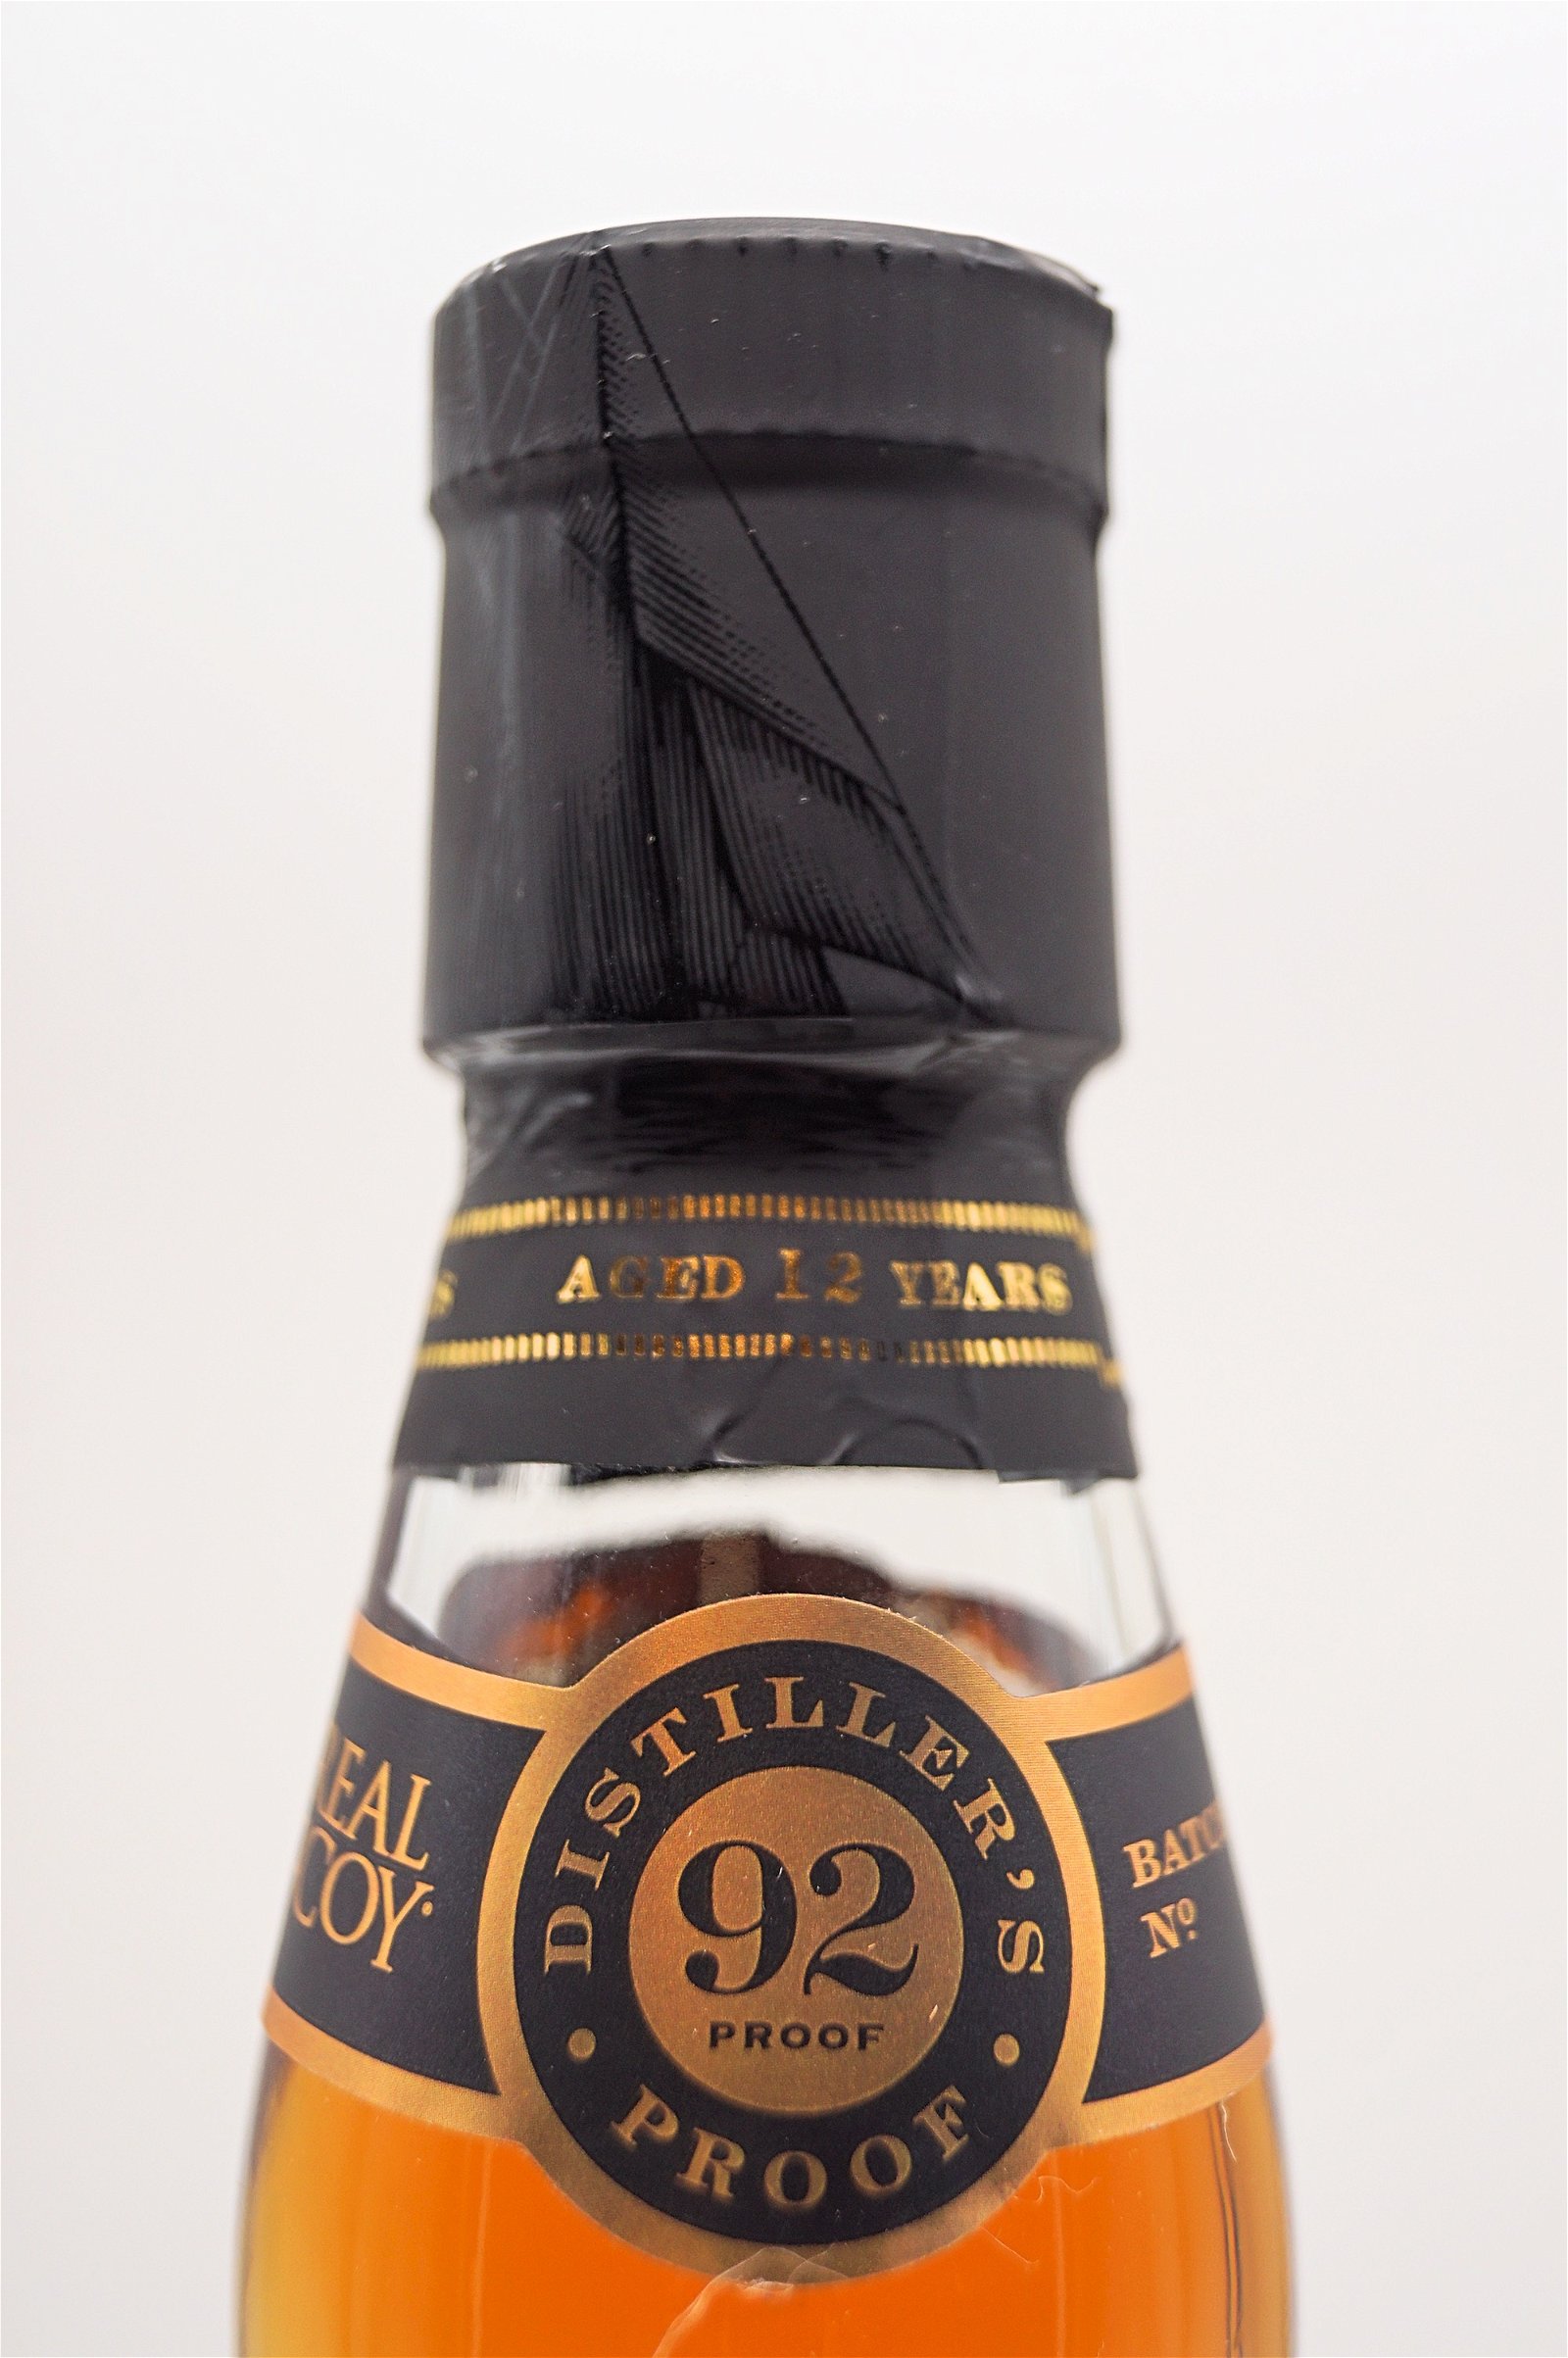 The Real Mc Coy 12 Jahre Distillers Proof Single Blended Rum 46%